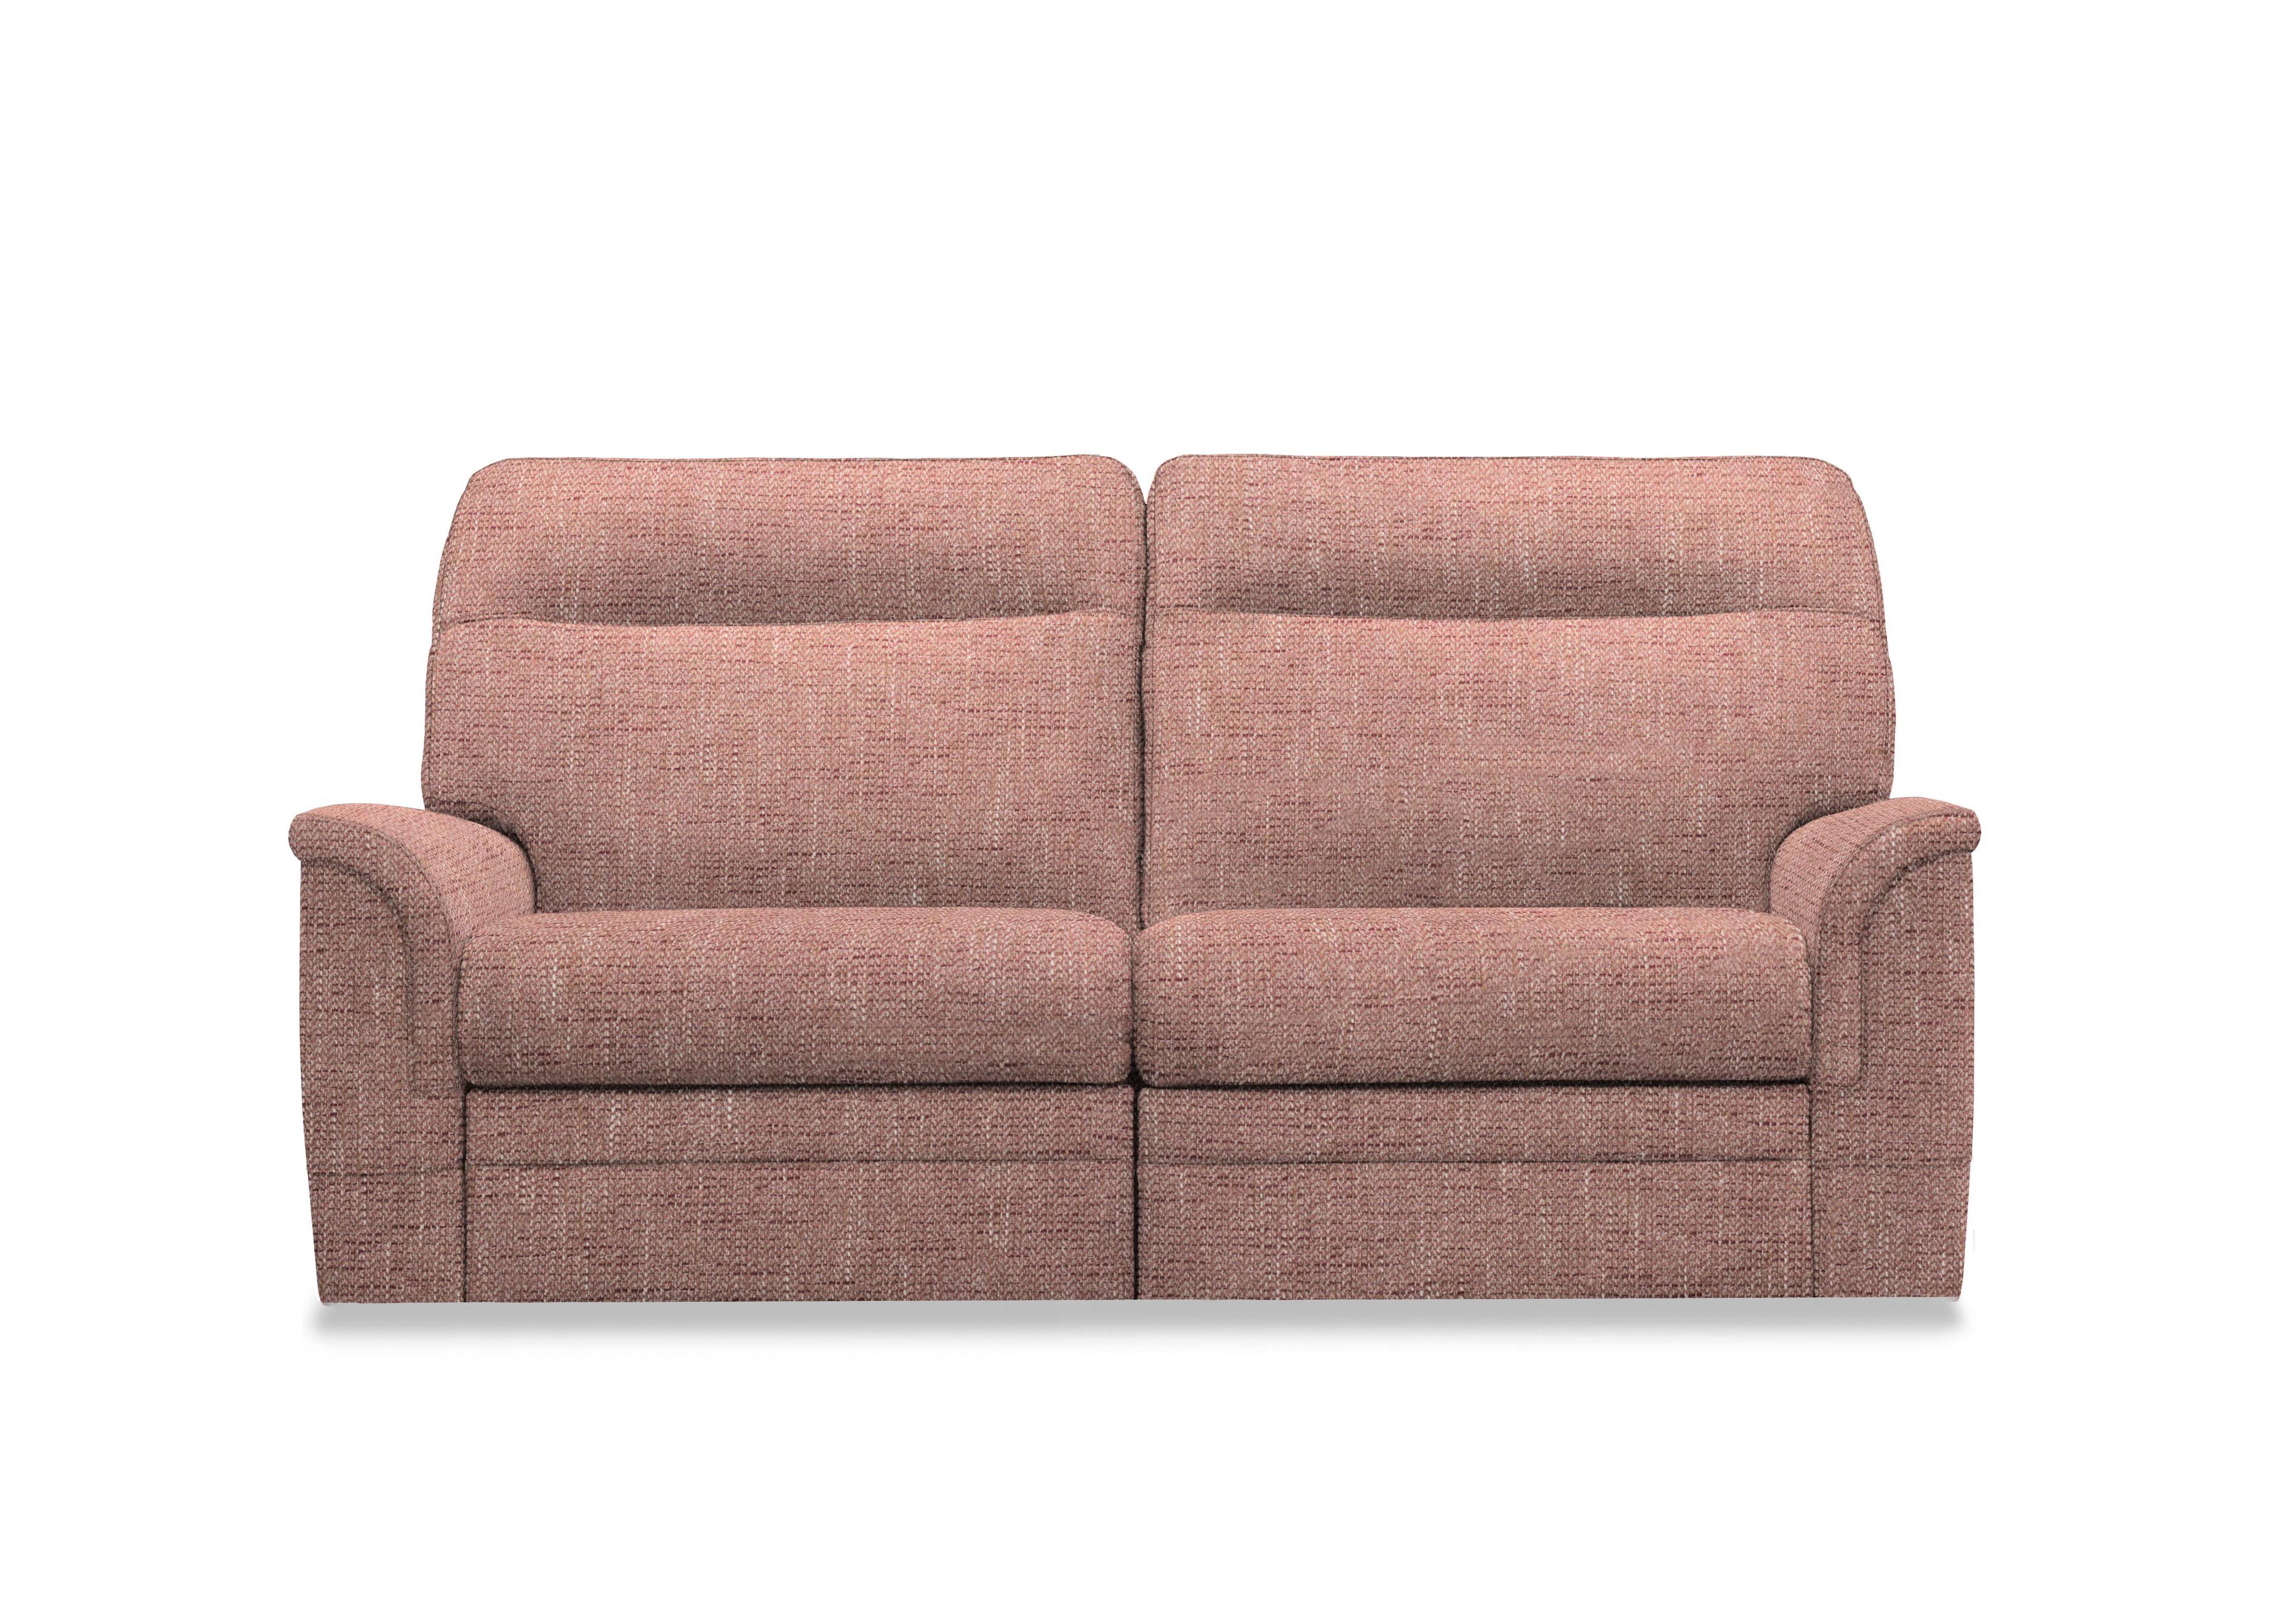 Hudson 23 Large 2 Seater Fabric Sofa in Country Rose 001409-0003 on Furniture Village